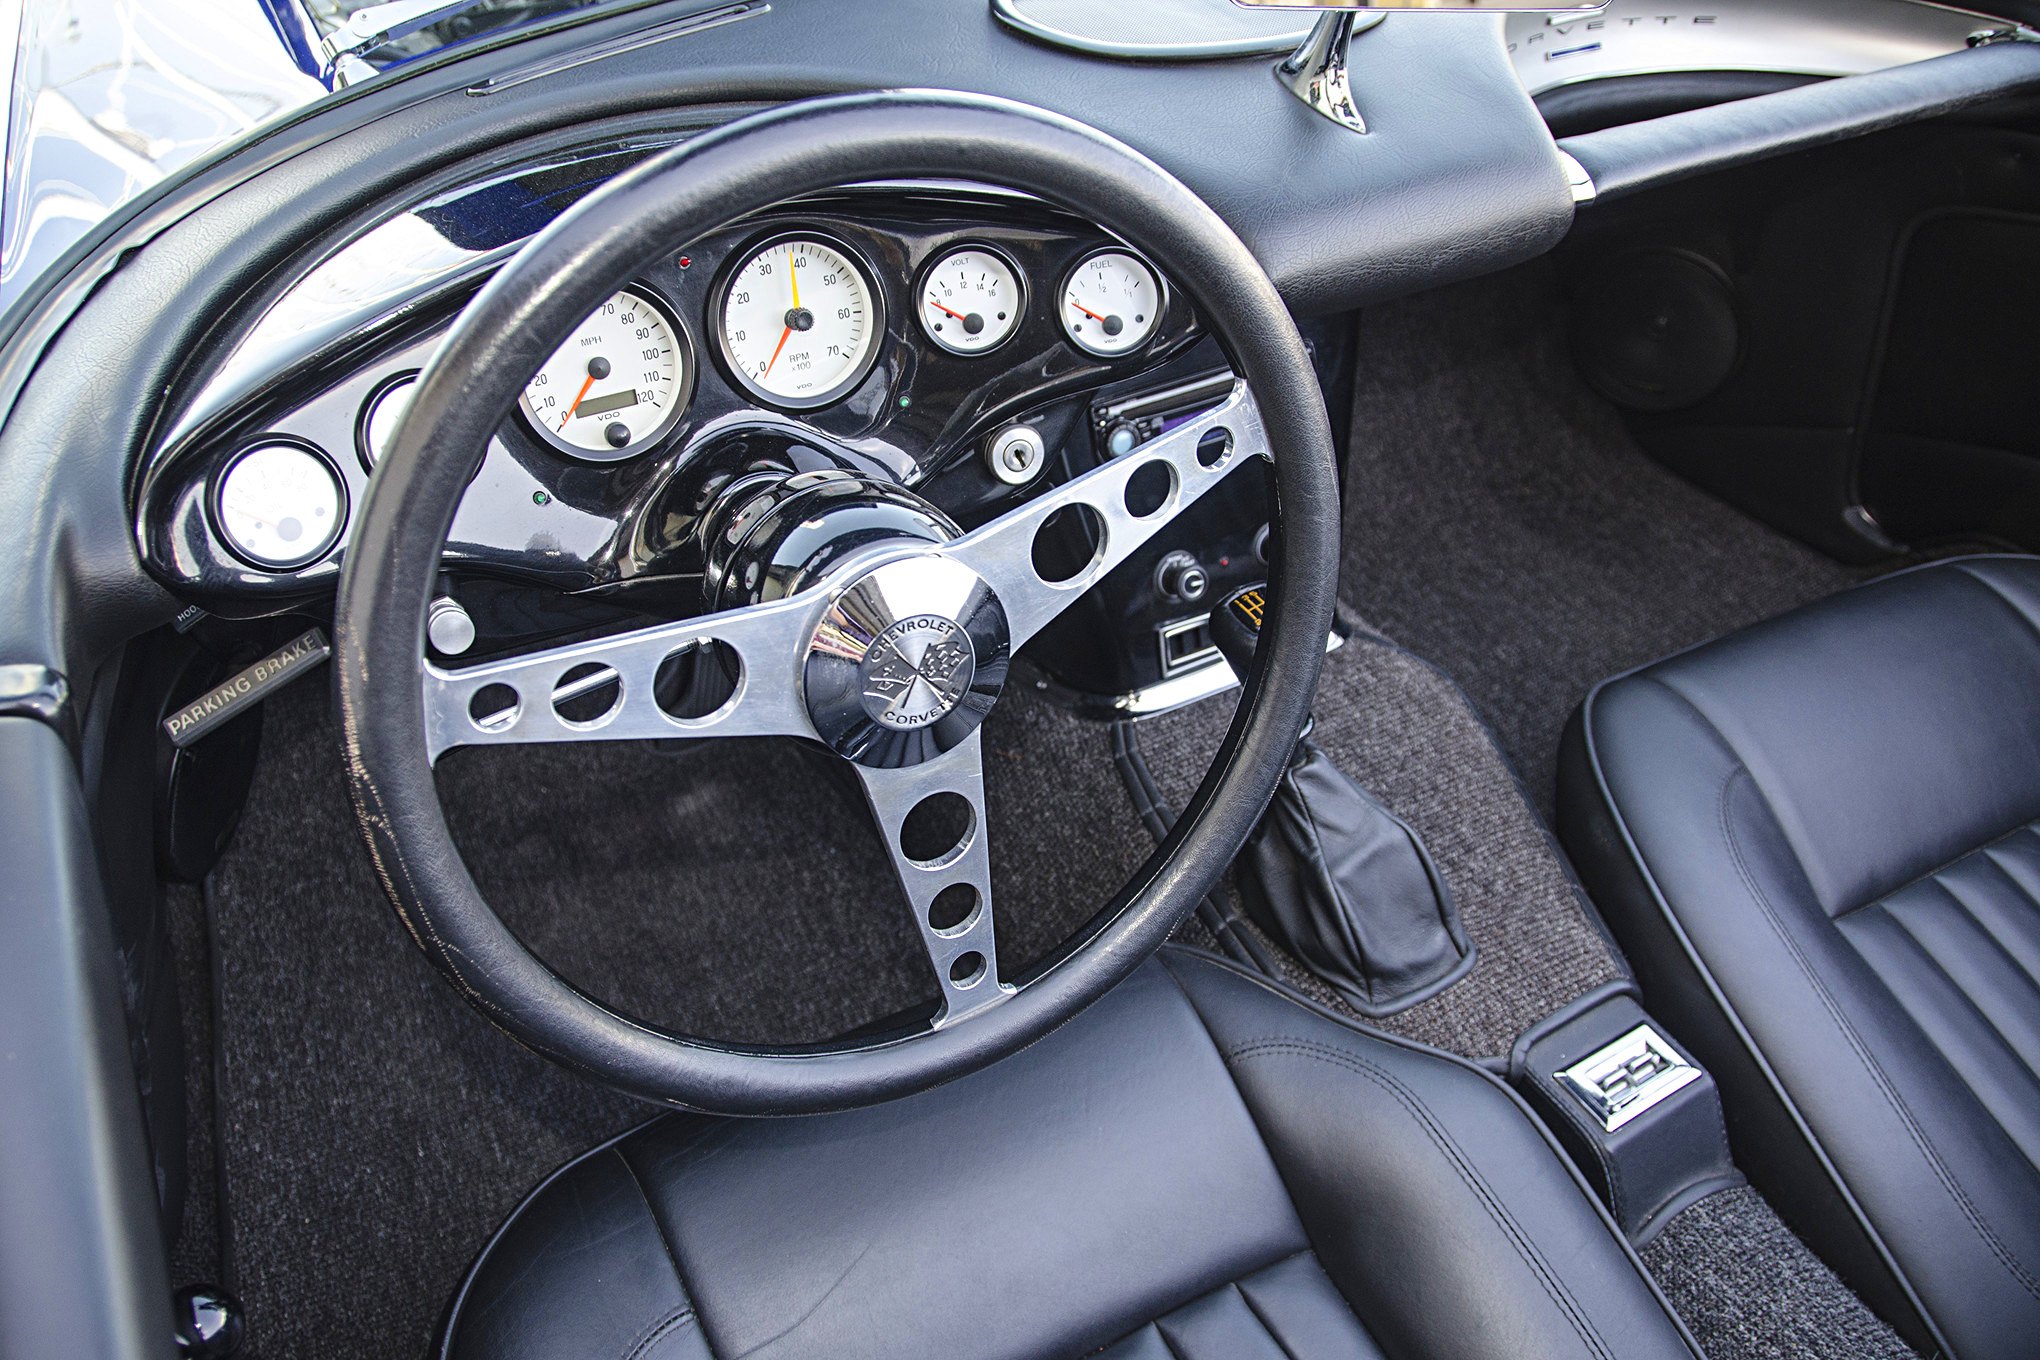 Chrome Steering Wheel in Blue Convertible Chevy Corvette - Photo by Steve Temple